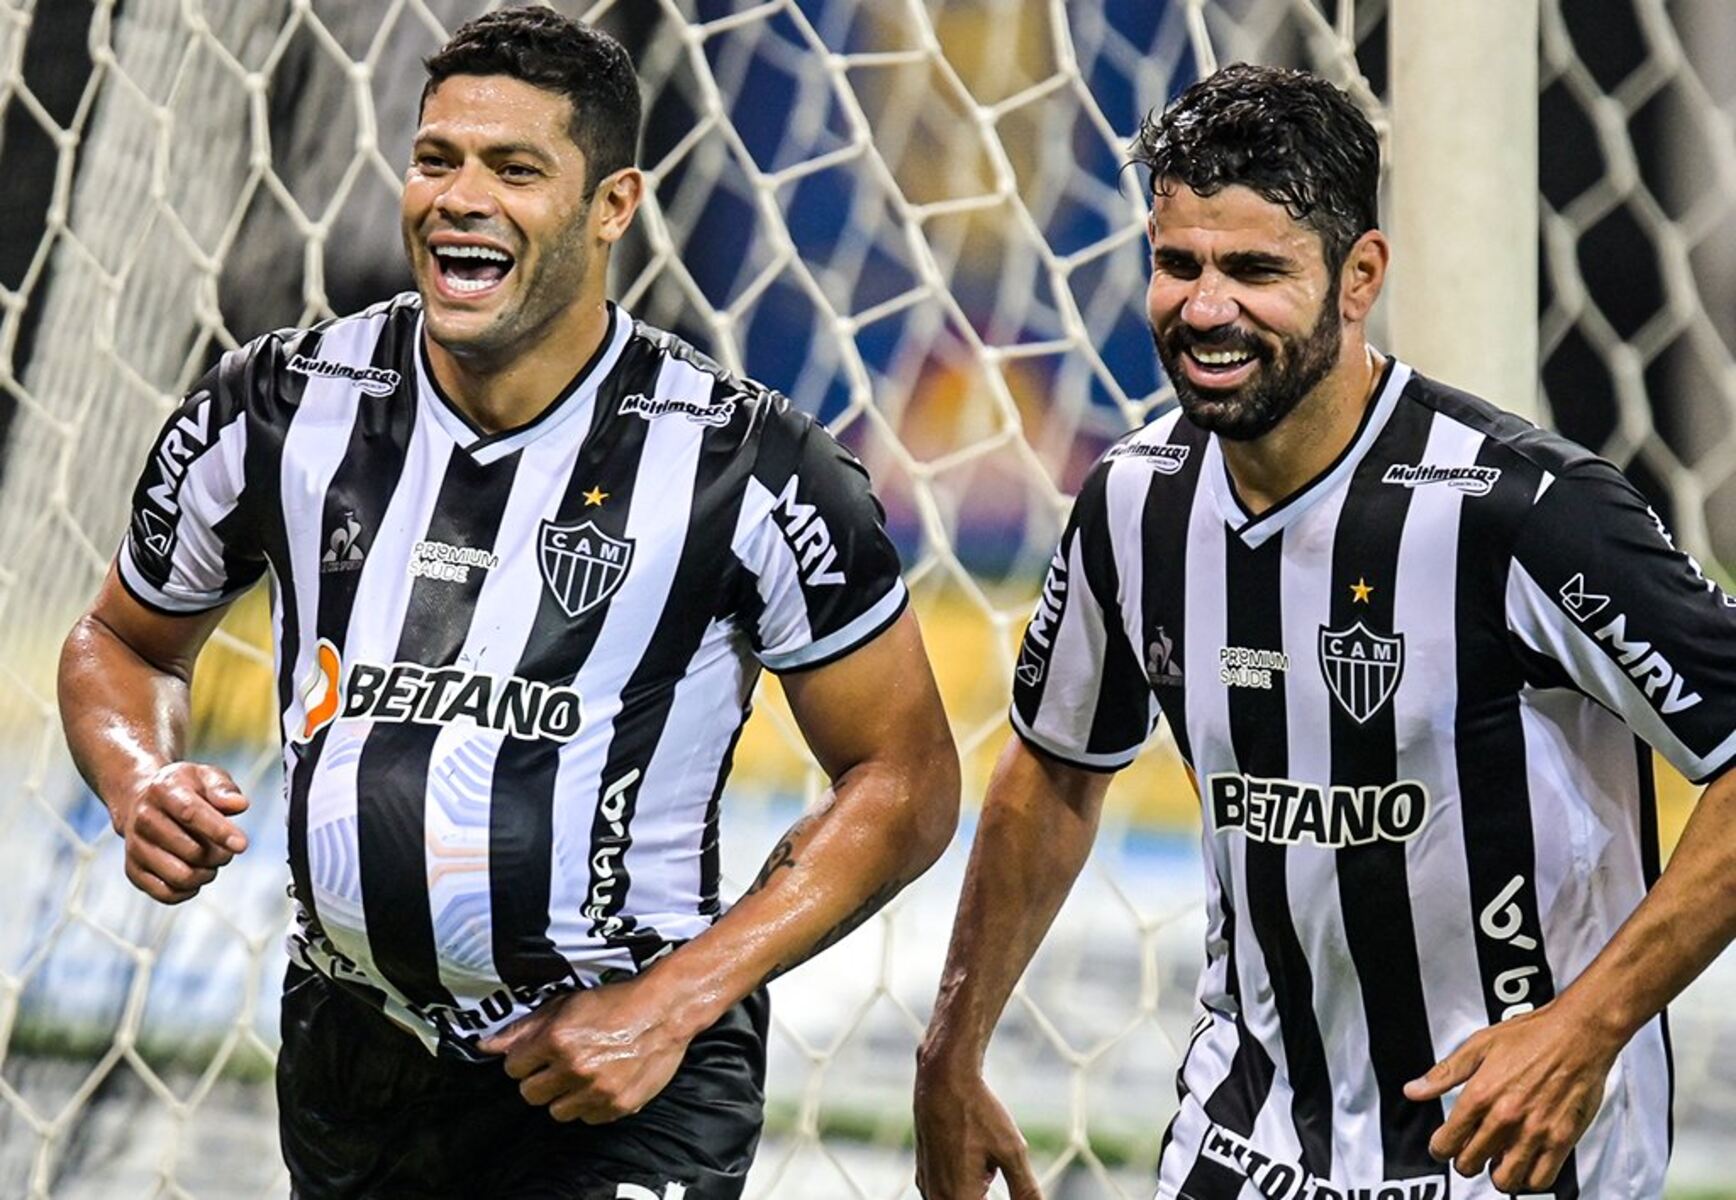 https://facts.net/wp-content/uploads/2023/09/clube-atletico-mineiro-12-football-club-facts-1694875636.jpg